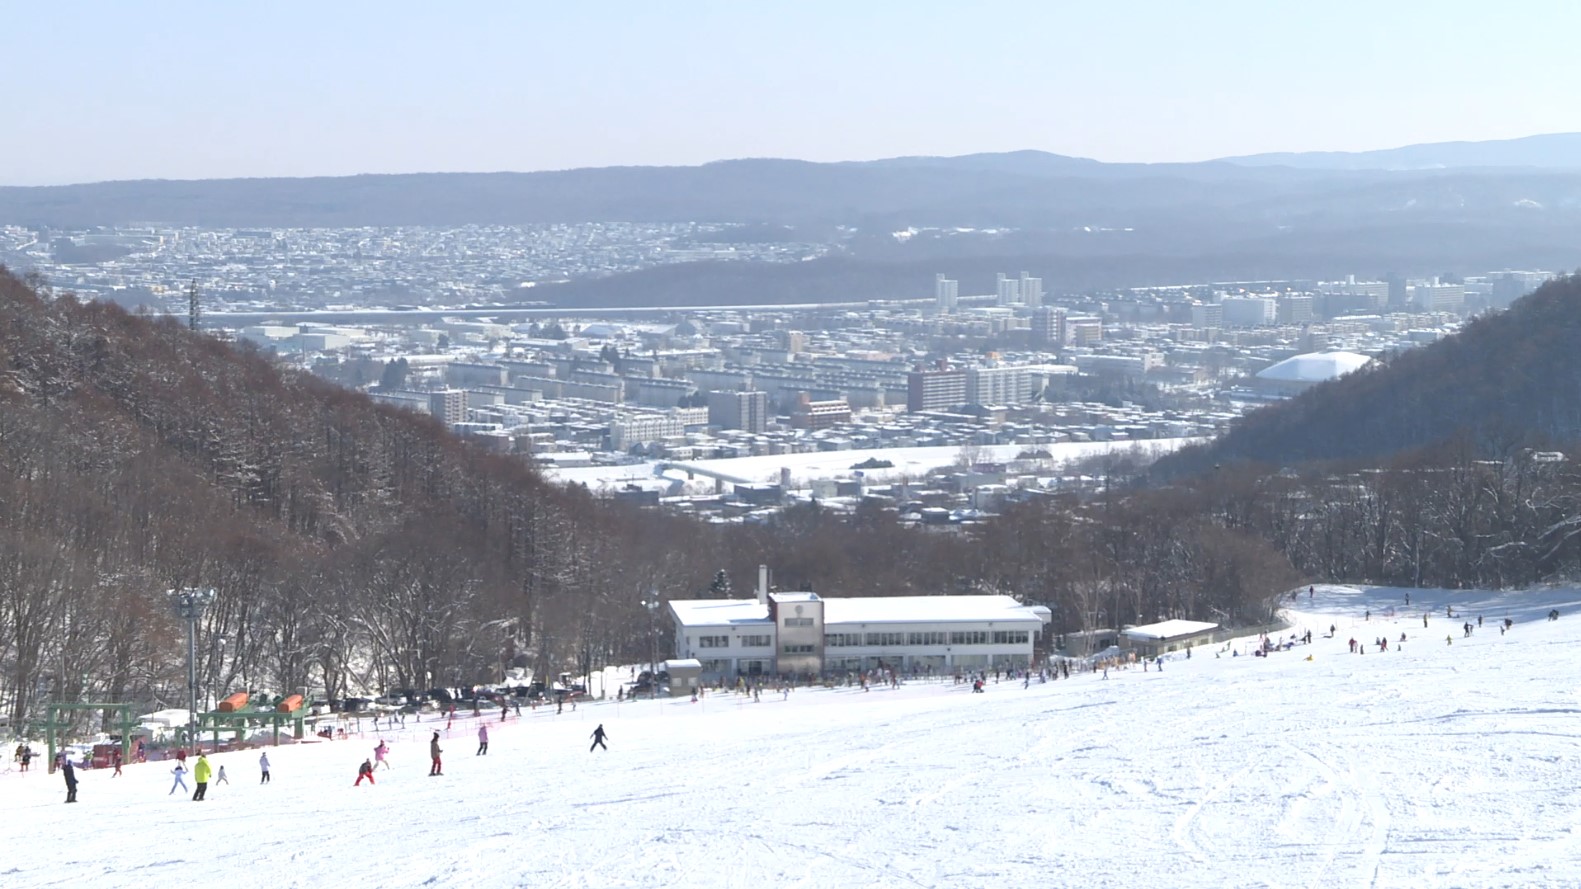 The City, the Citizens, and Winter Sports